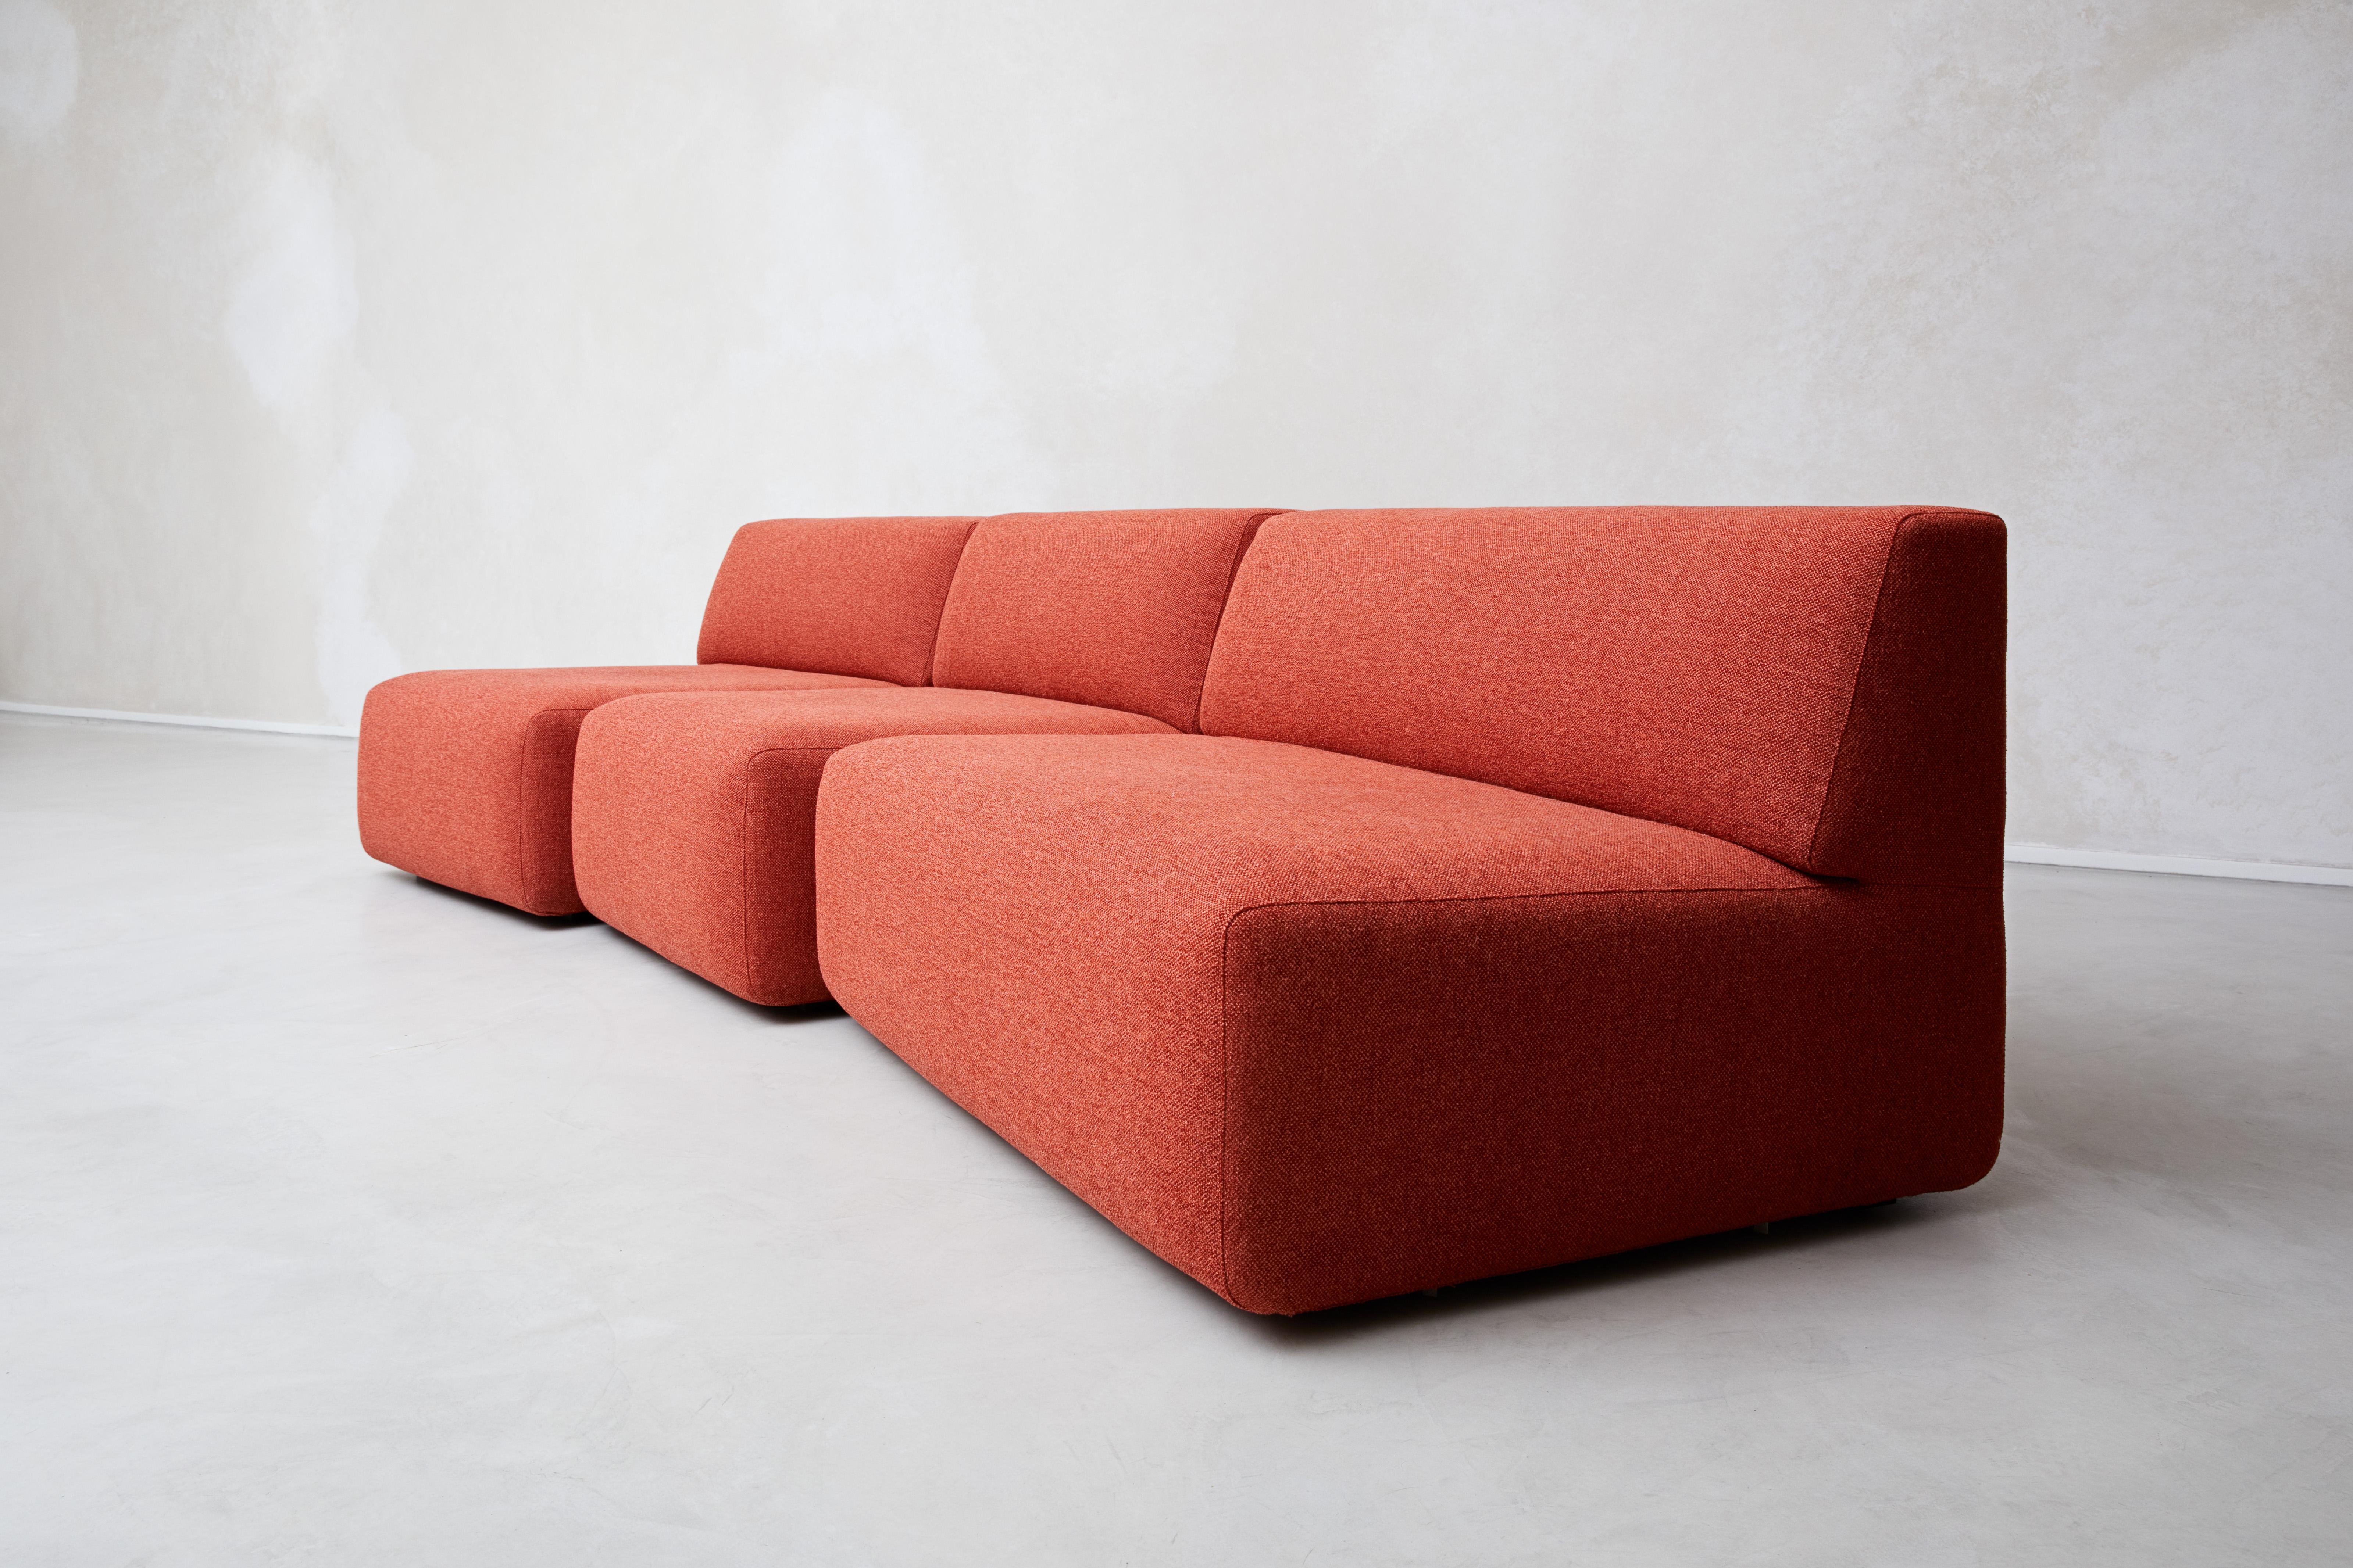 Red couch by Marc Dibeh
Materials: Fabric
Dimensions: W 290 x D90 x H65 cm 

Beirut based designer Marc Dibeh narrates his cultural environment through compelling interiors and products.
His studio’s philosophy revolves around storytelling and